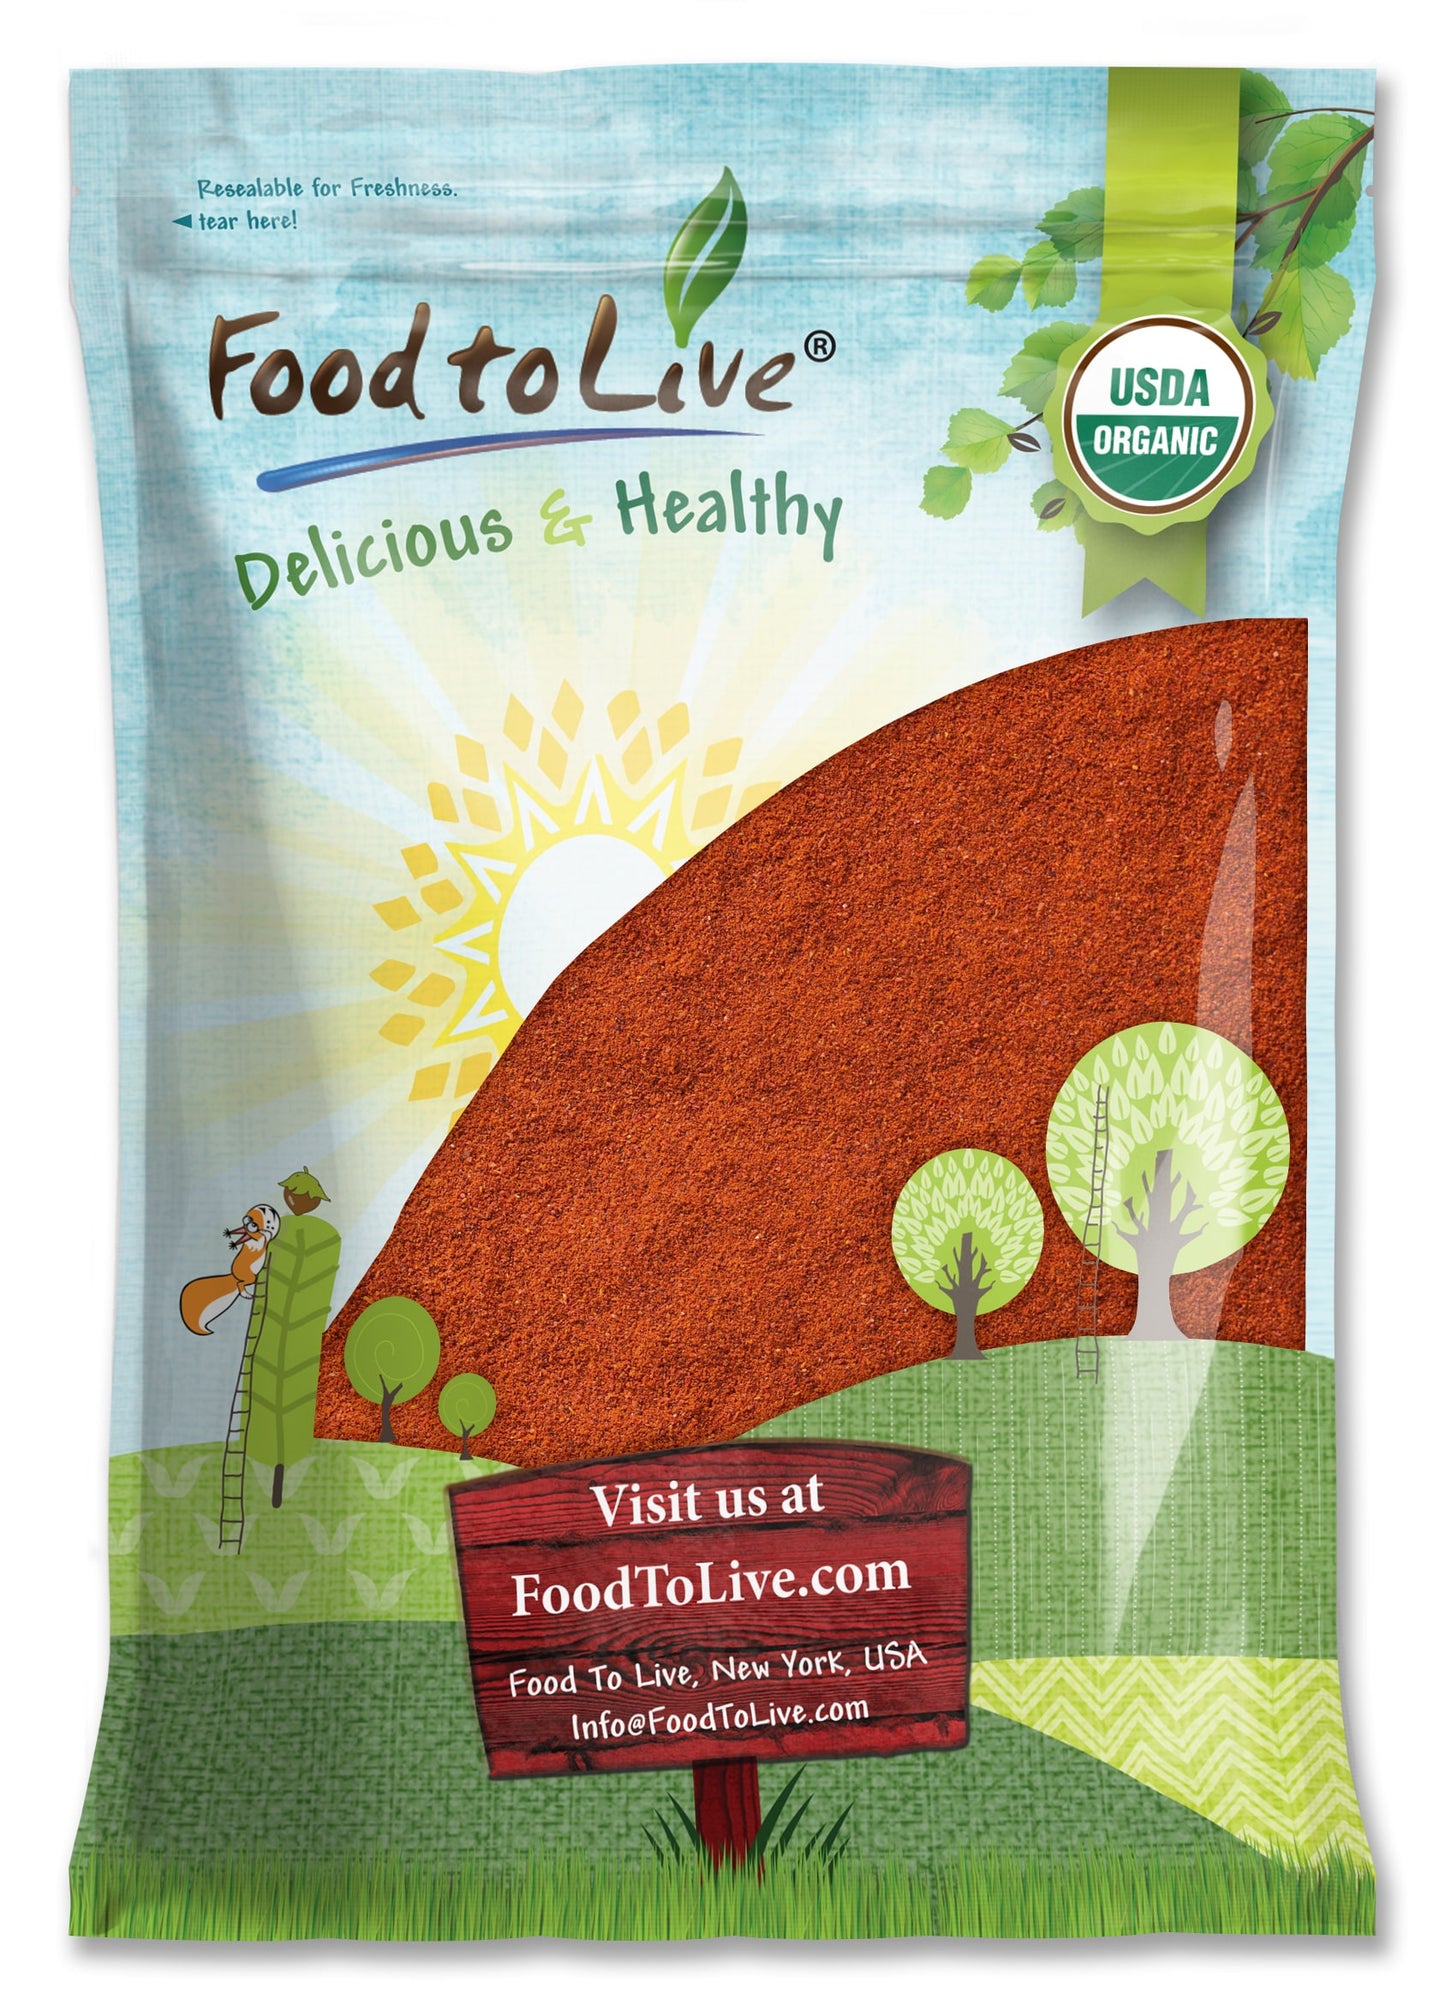 Organic Tomato Powder with Sea Salt – Made from Non-GMO Sun-Dried Tomatoes. Vegan, Keto-Friendly. Non-Irradiated. Bulk Spice. Perfect for Seasoning, Cooking and Tomato Paste